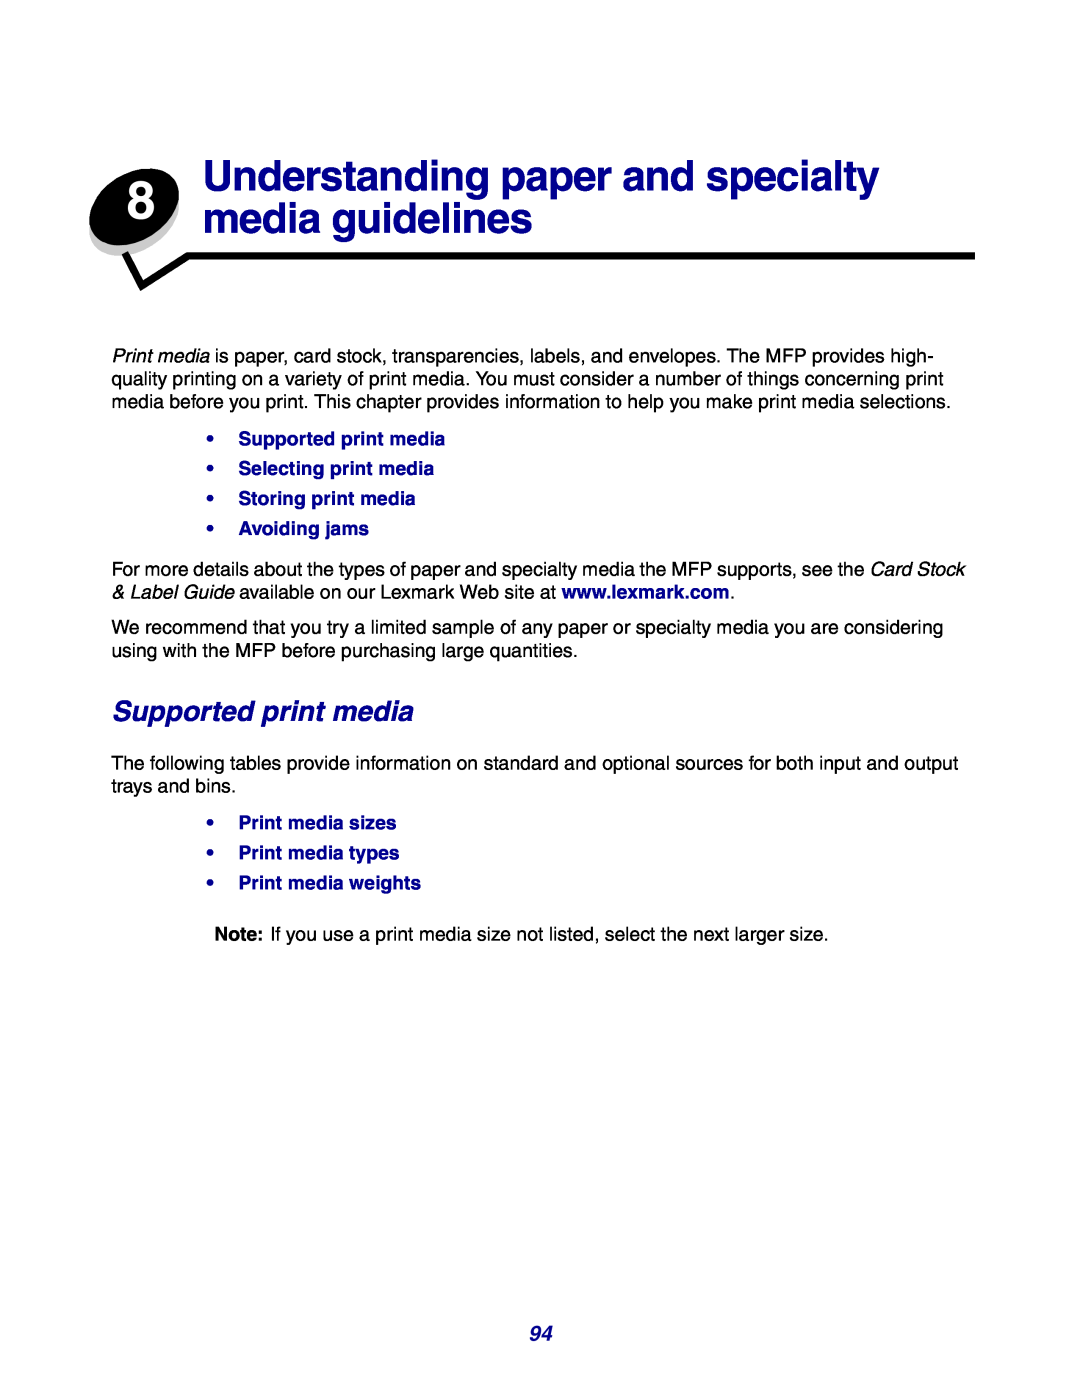 Lexmark X642e manual Understanding paper and specialty 8 media guidelines, Supported print media, Avoiding jams 